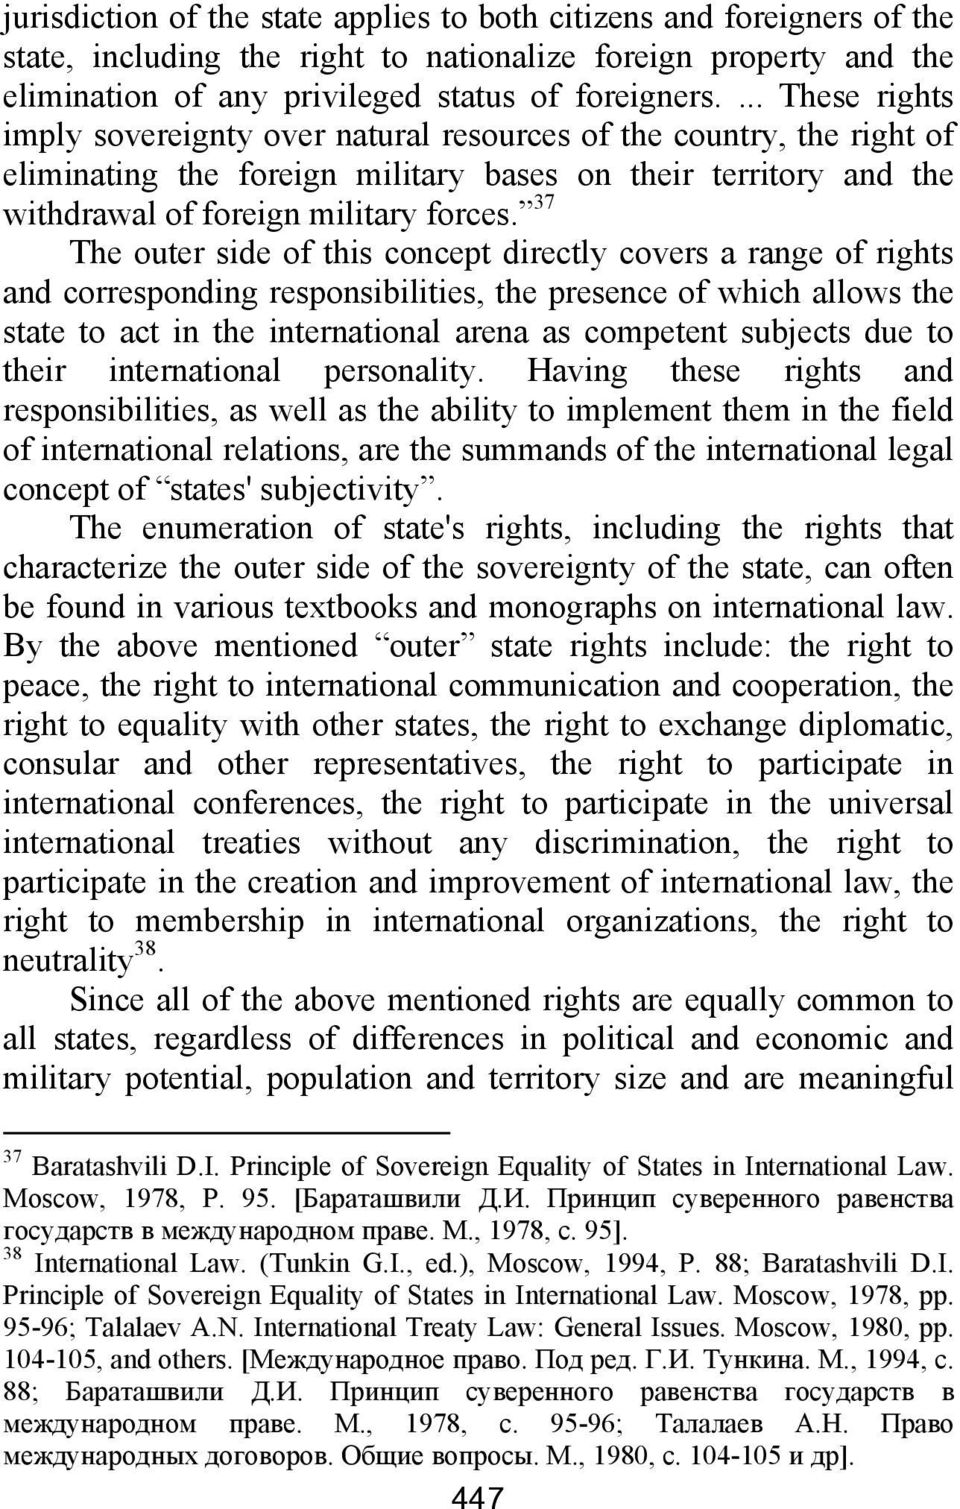 37 The outer side of this concept directly covers a range of rights and corresponding responsibilities, the presence of which allows the state to act in the international arena as competent subjects